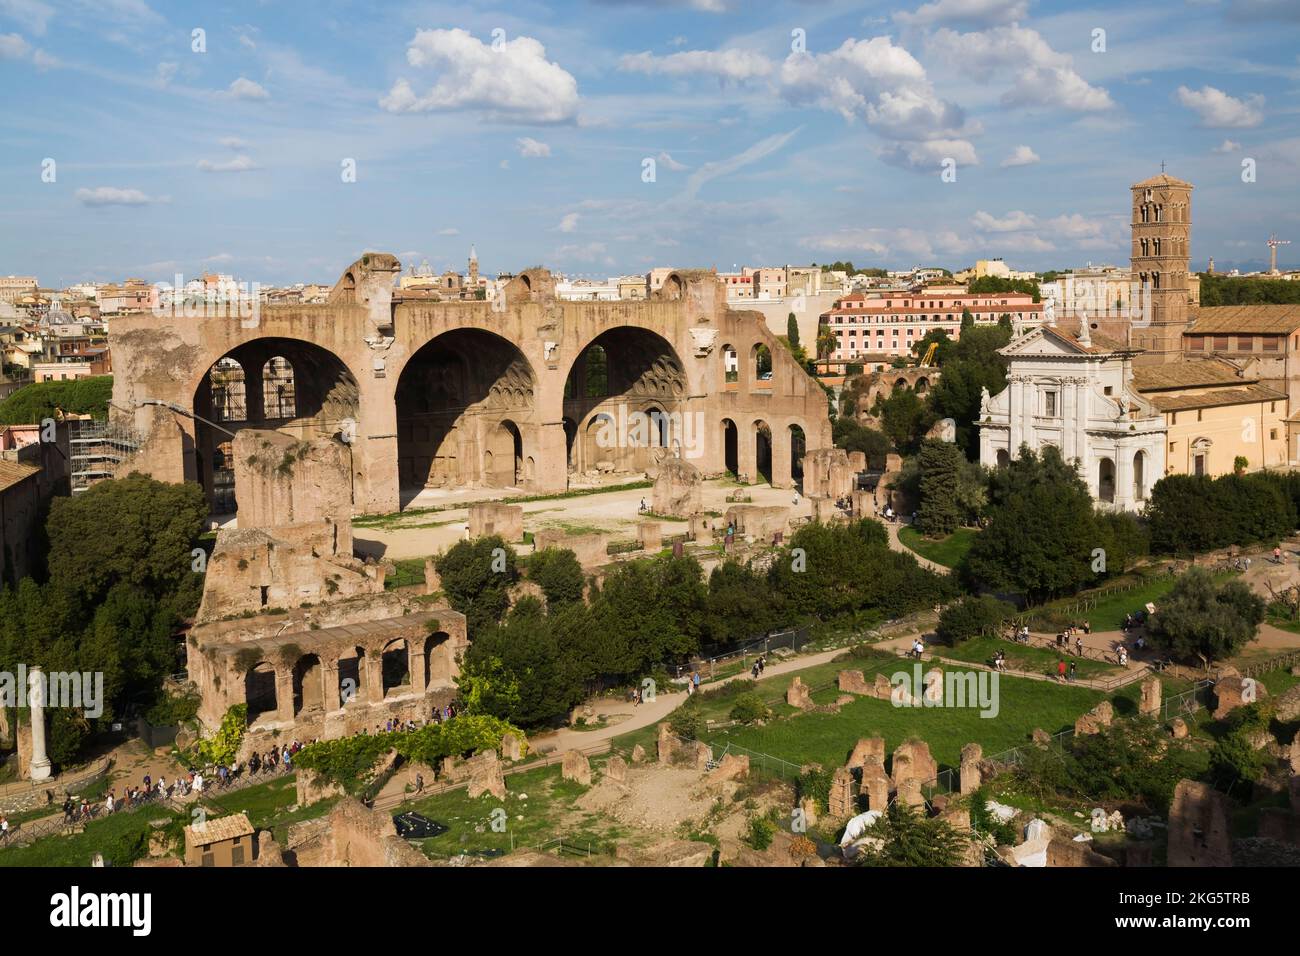 Top view of Roman Forum ruins with Farnese gardens and Basilica of Maxentius, Rome, Italy. Stock Photo